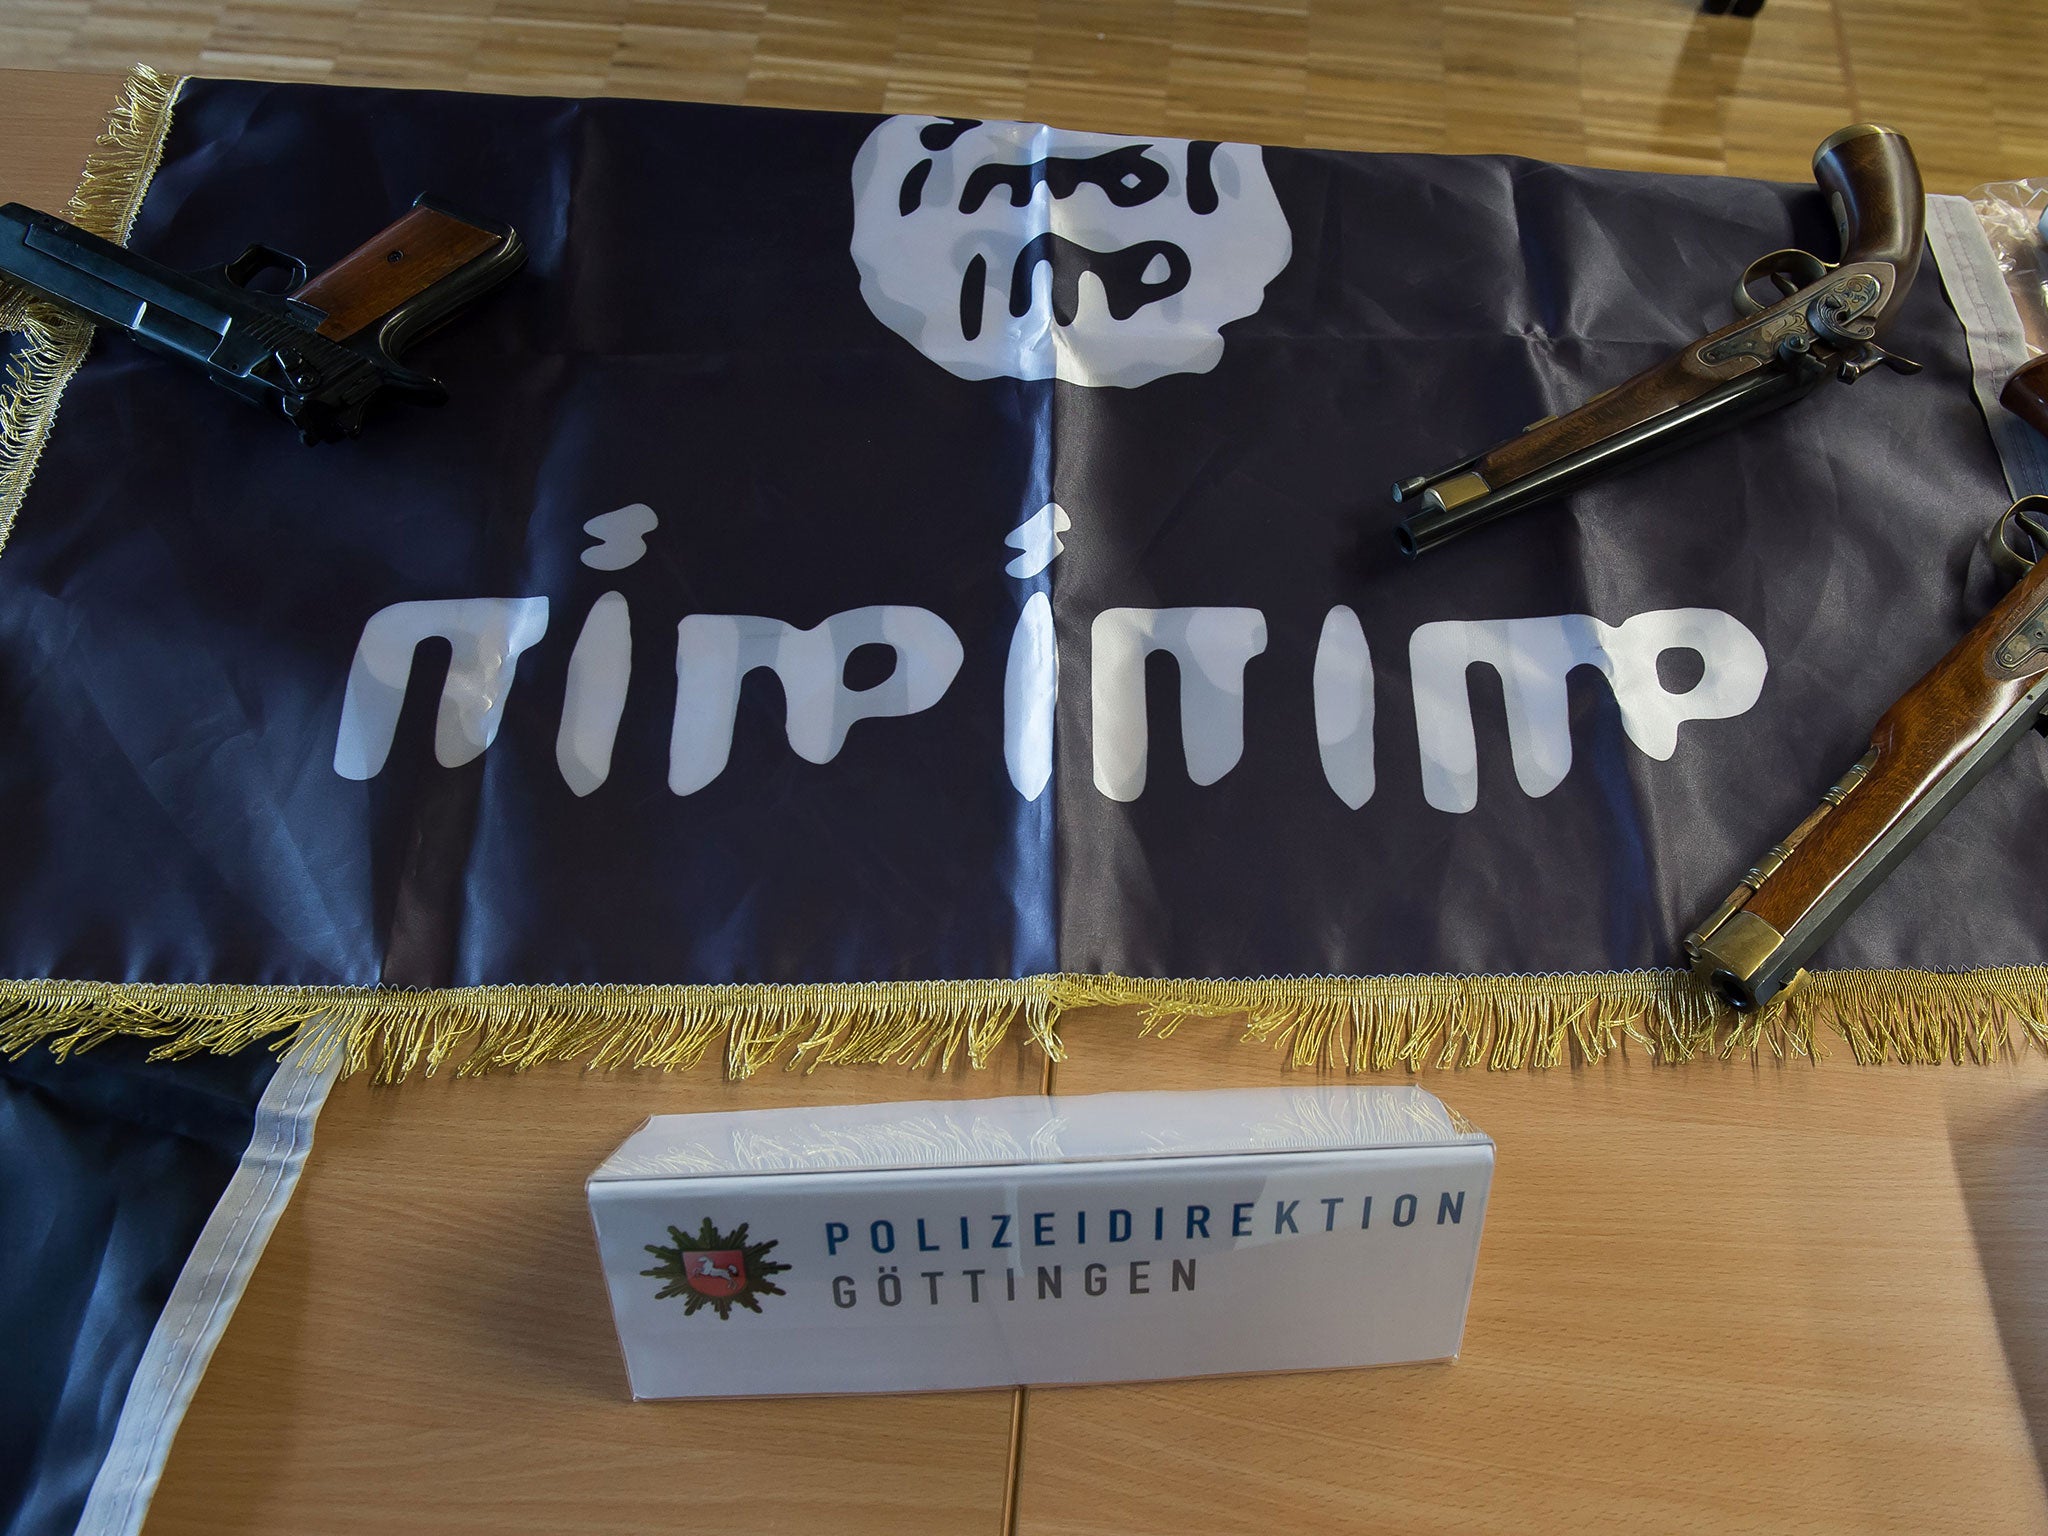 Confiscated weapons and an Isis flag seized in Gottingen, Germany, by police investigating Algerian and Nigerian men suspected of planning a terror attack